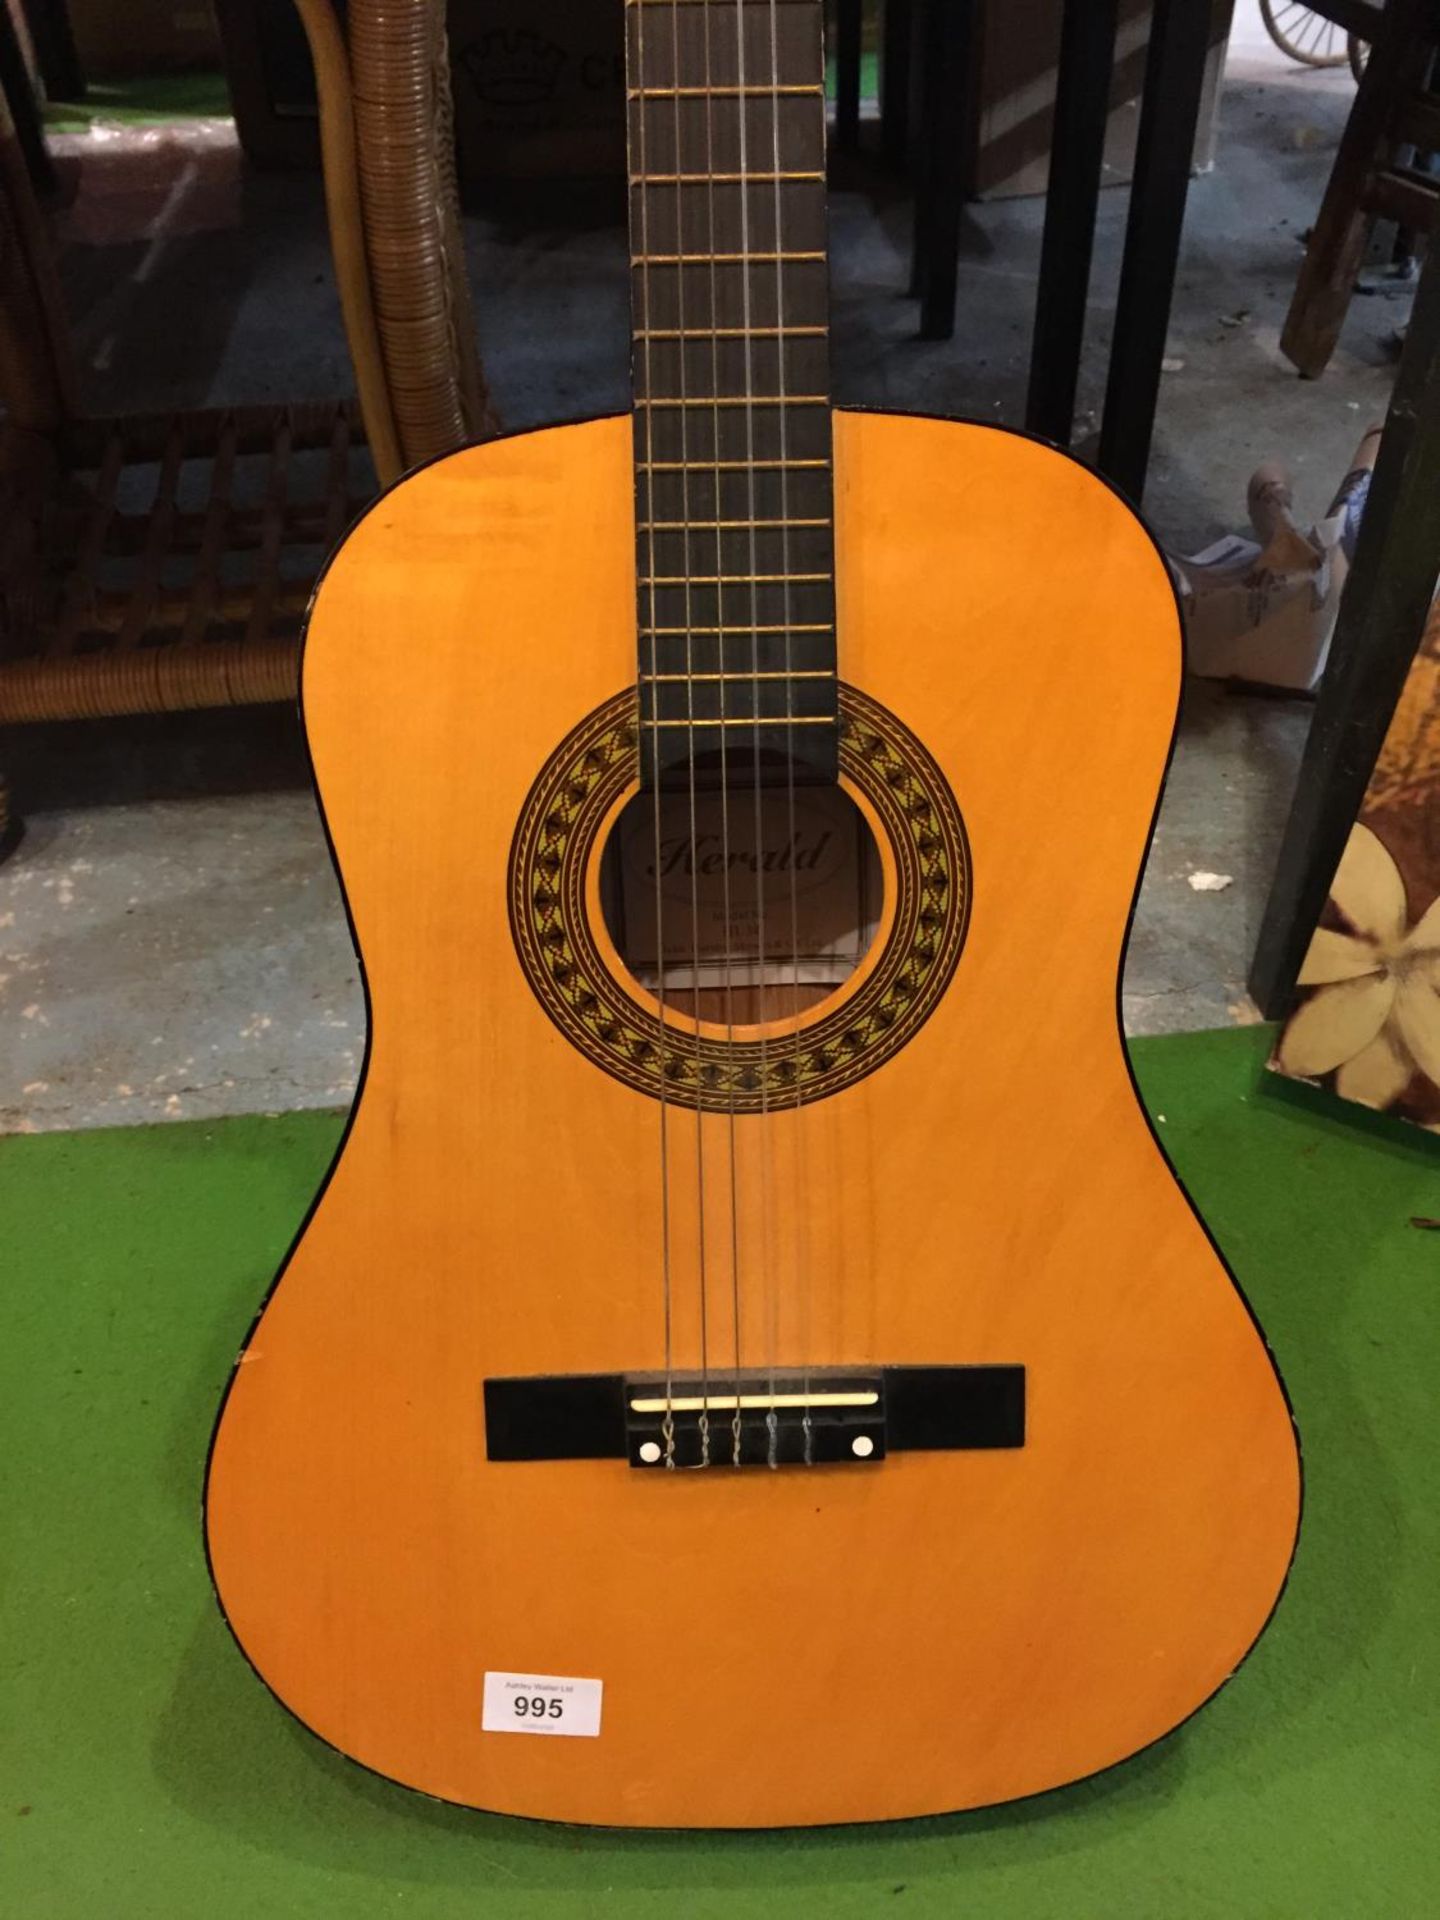 A 'HERALD' ACCOUSTIC GUITAR AND CASE - Image 2 of 2